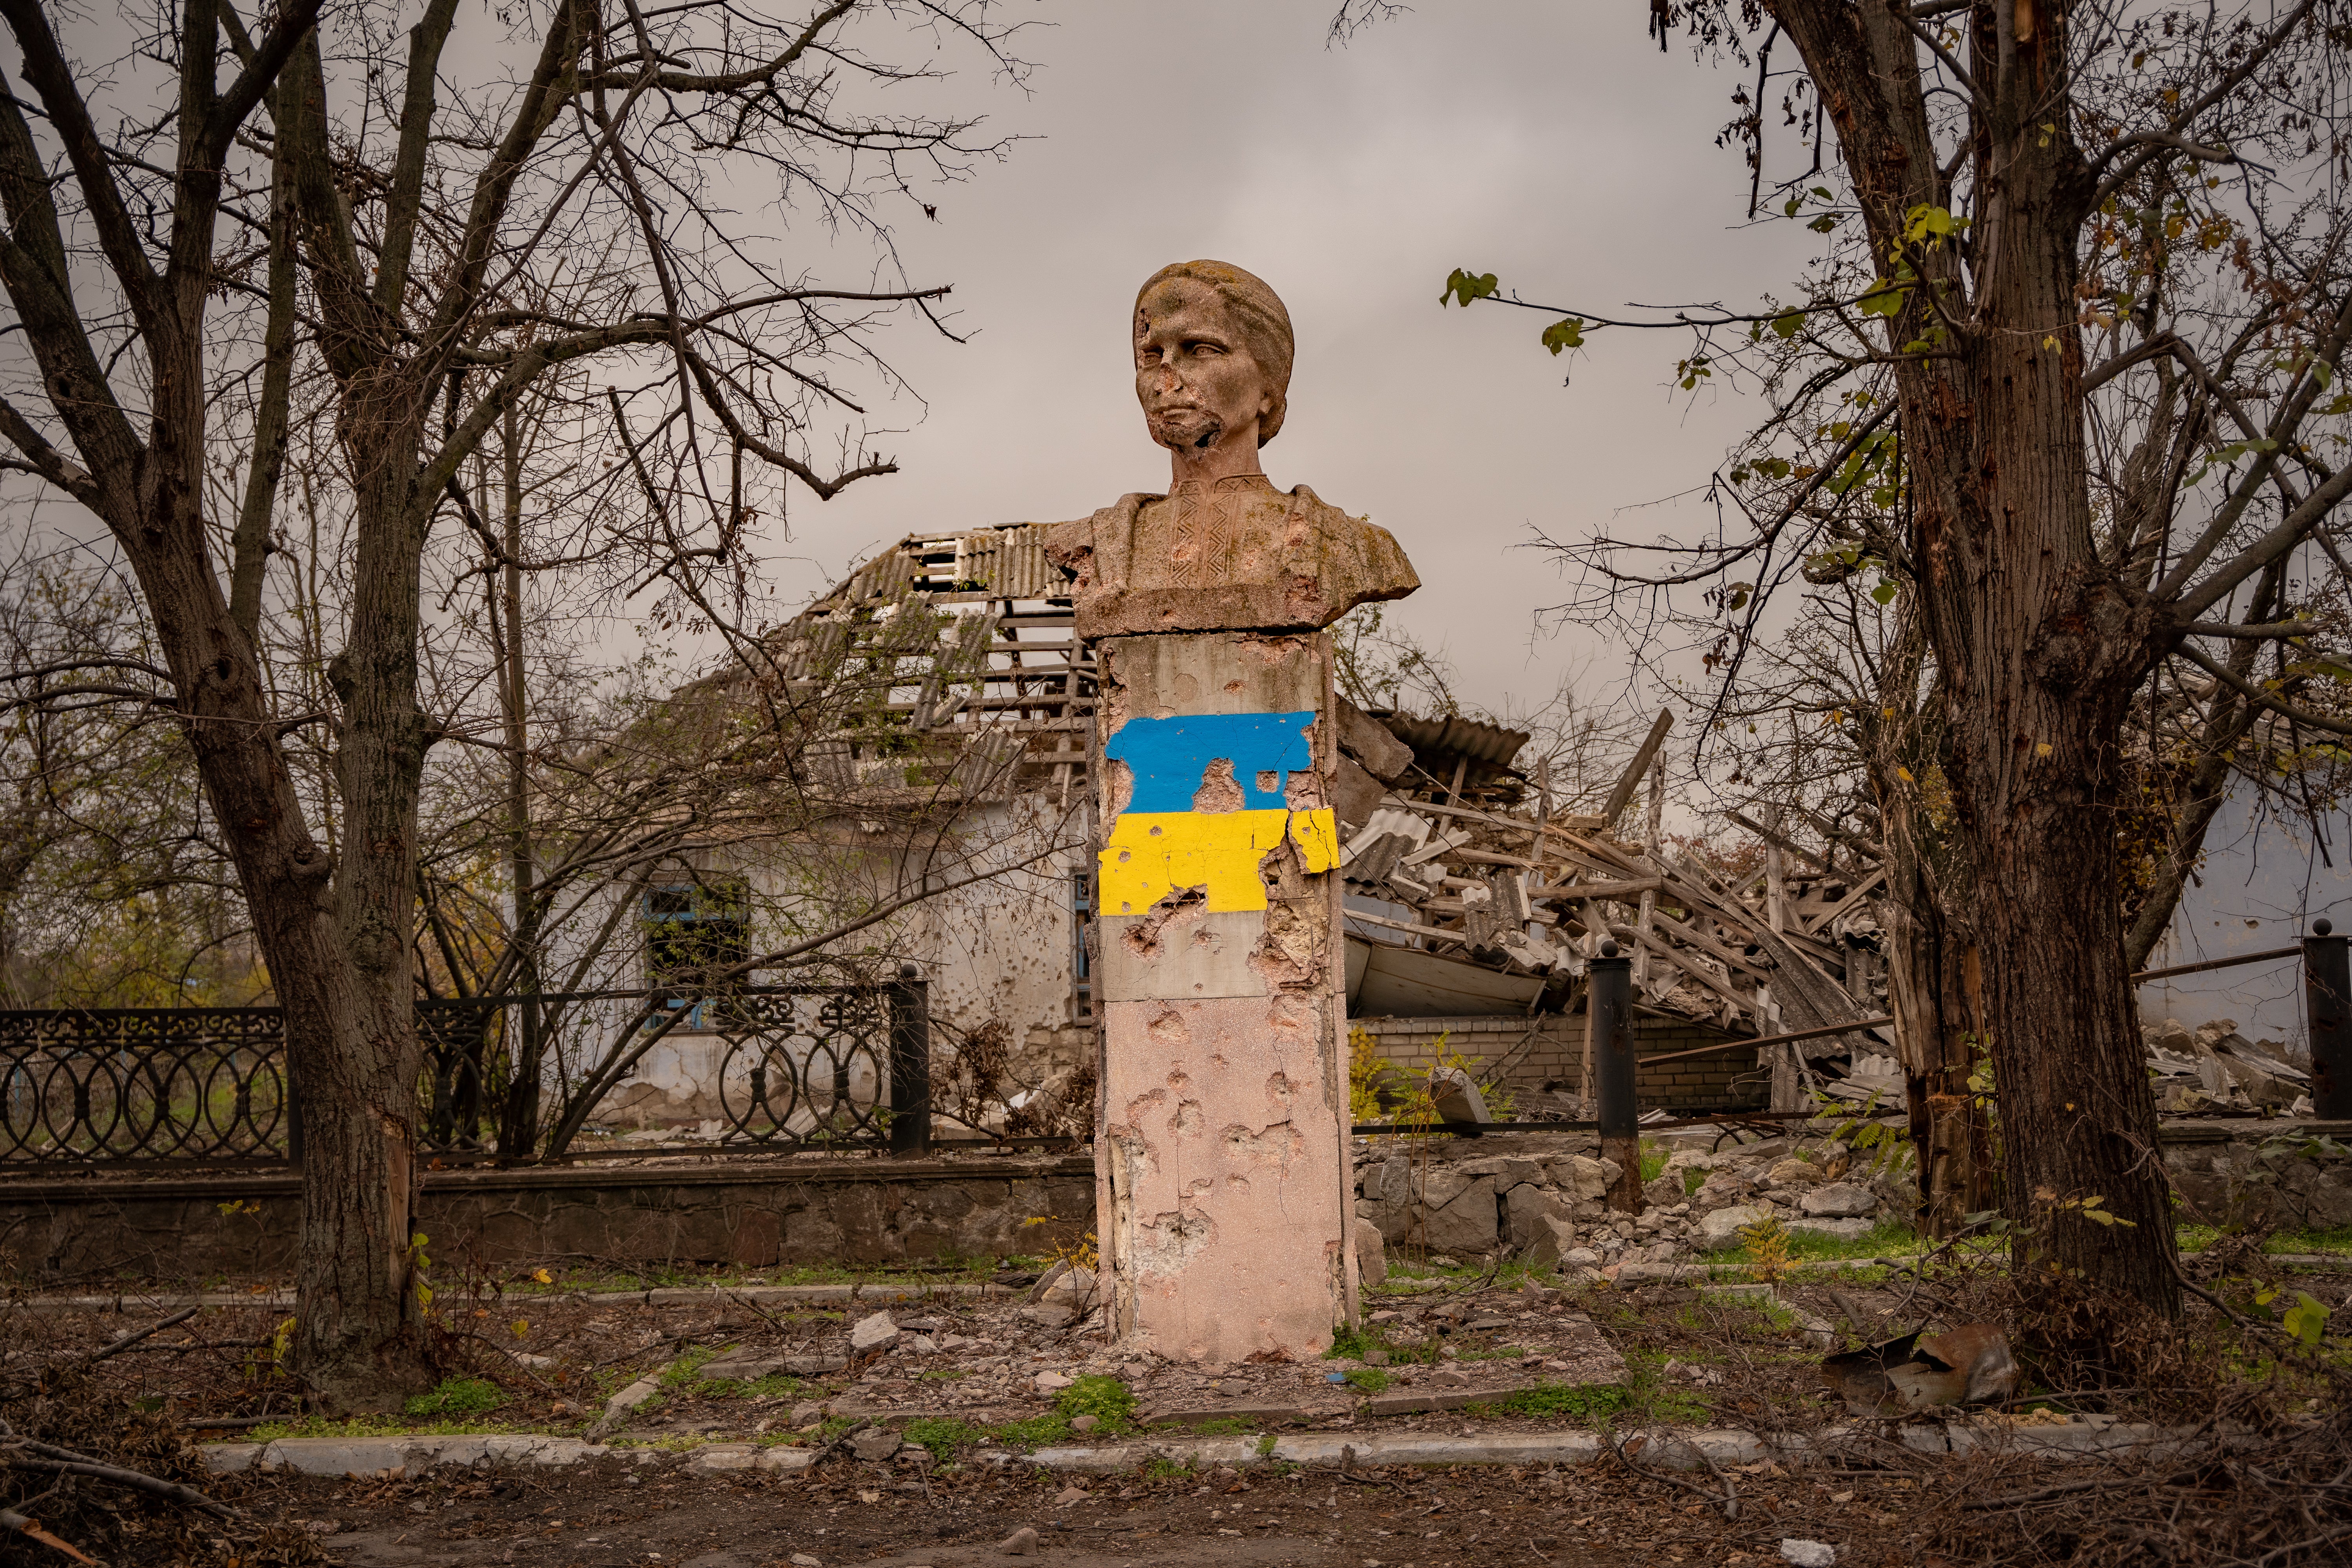 Many houses have been destroyed in the area around Kherson during Russian occupation